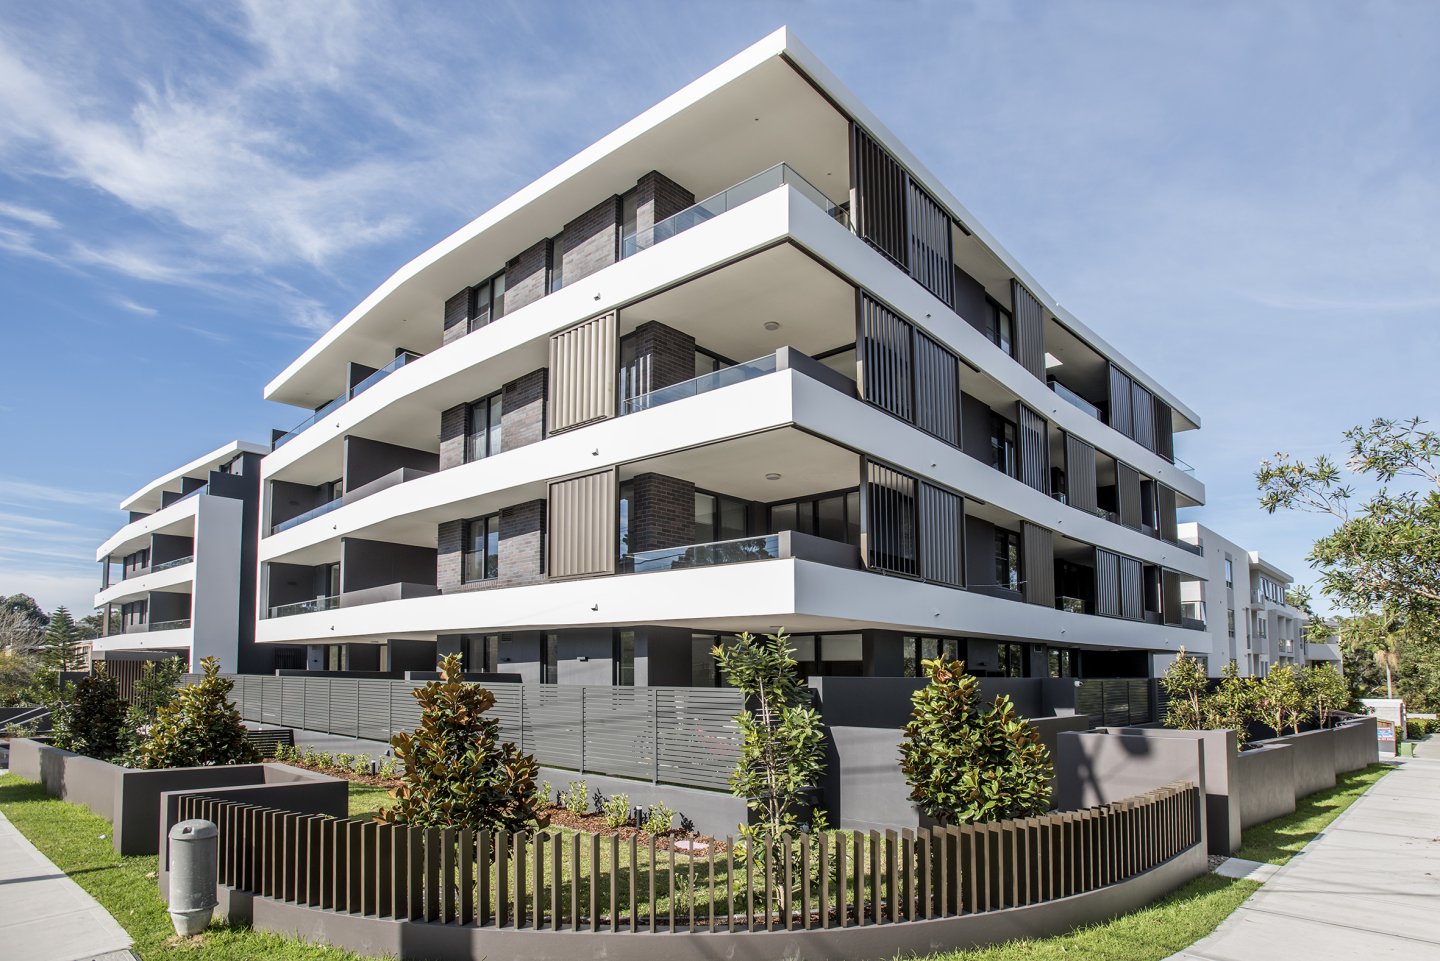 Collaboration drives win-win housing in Lane Cove